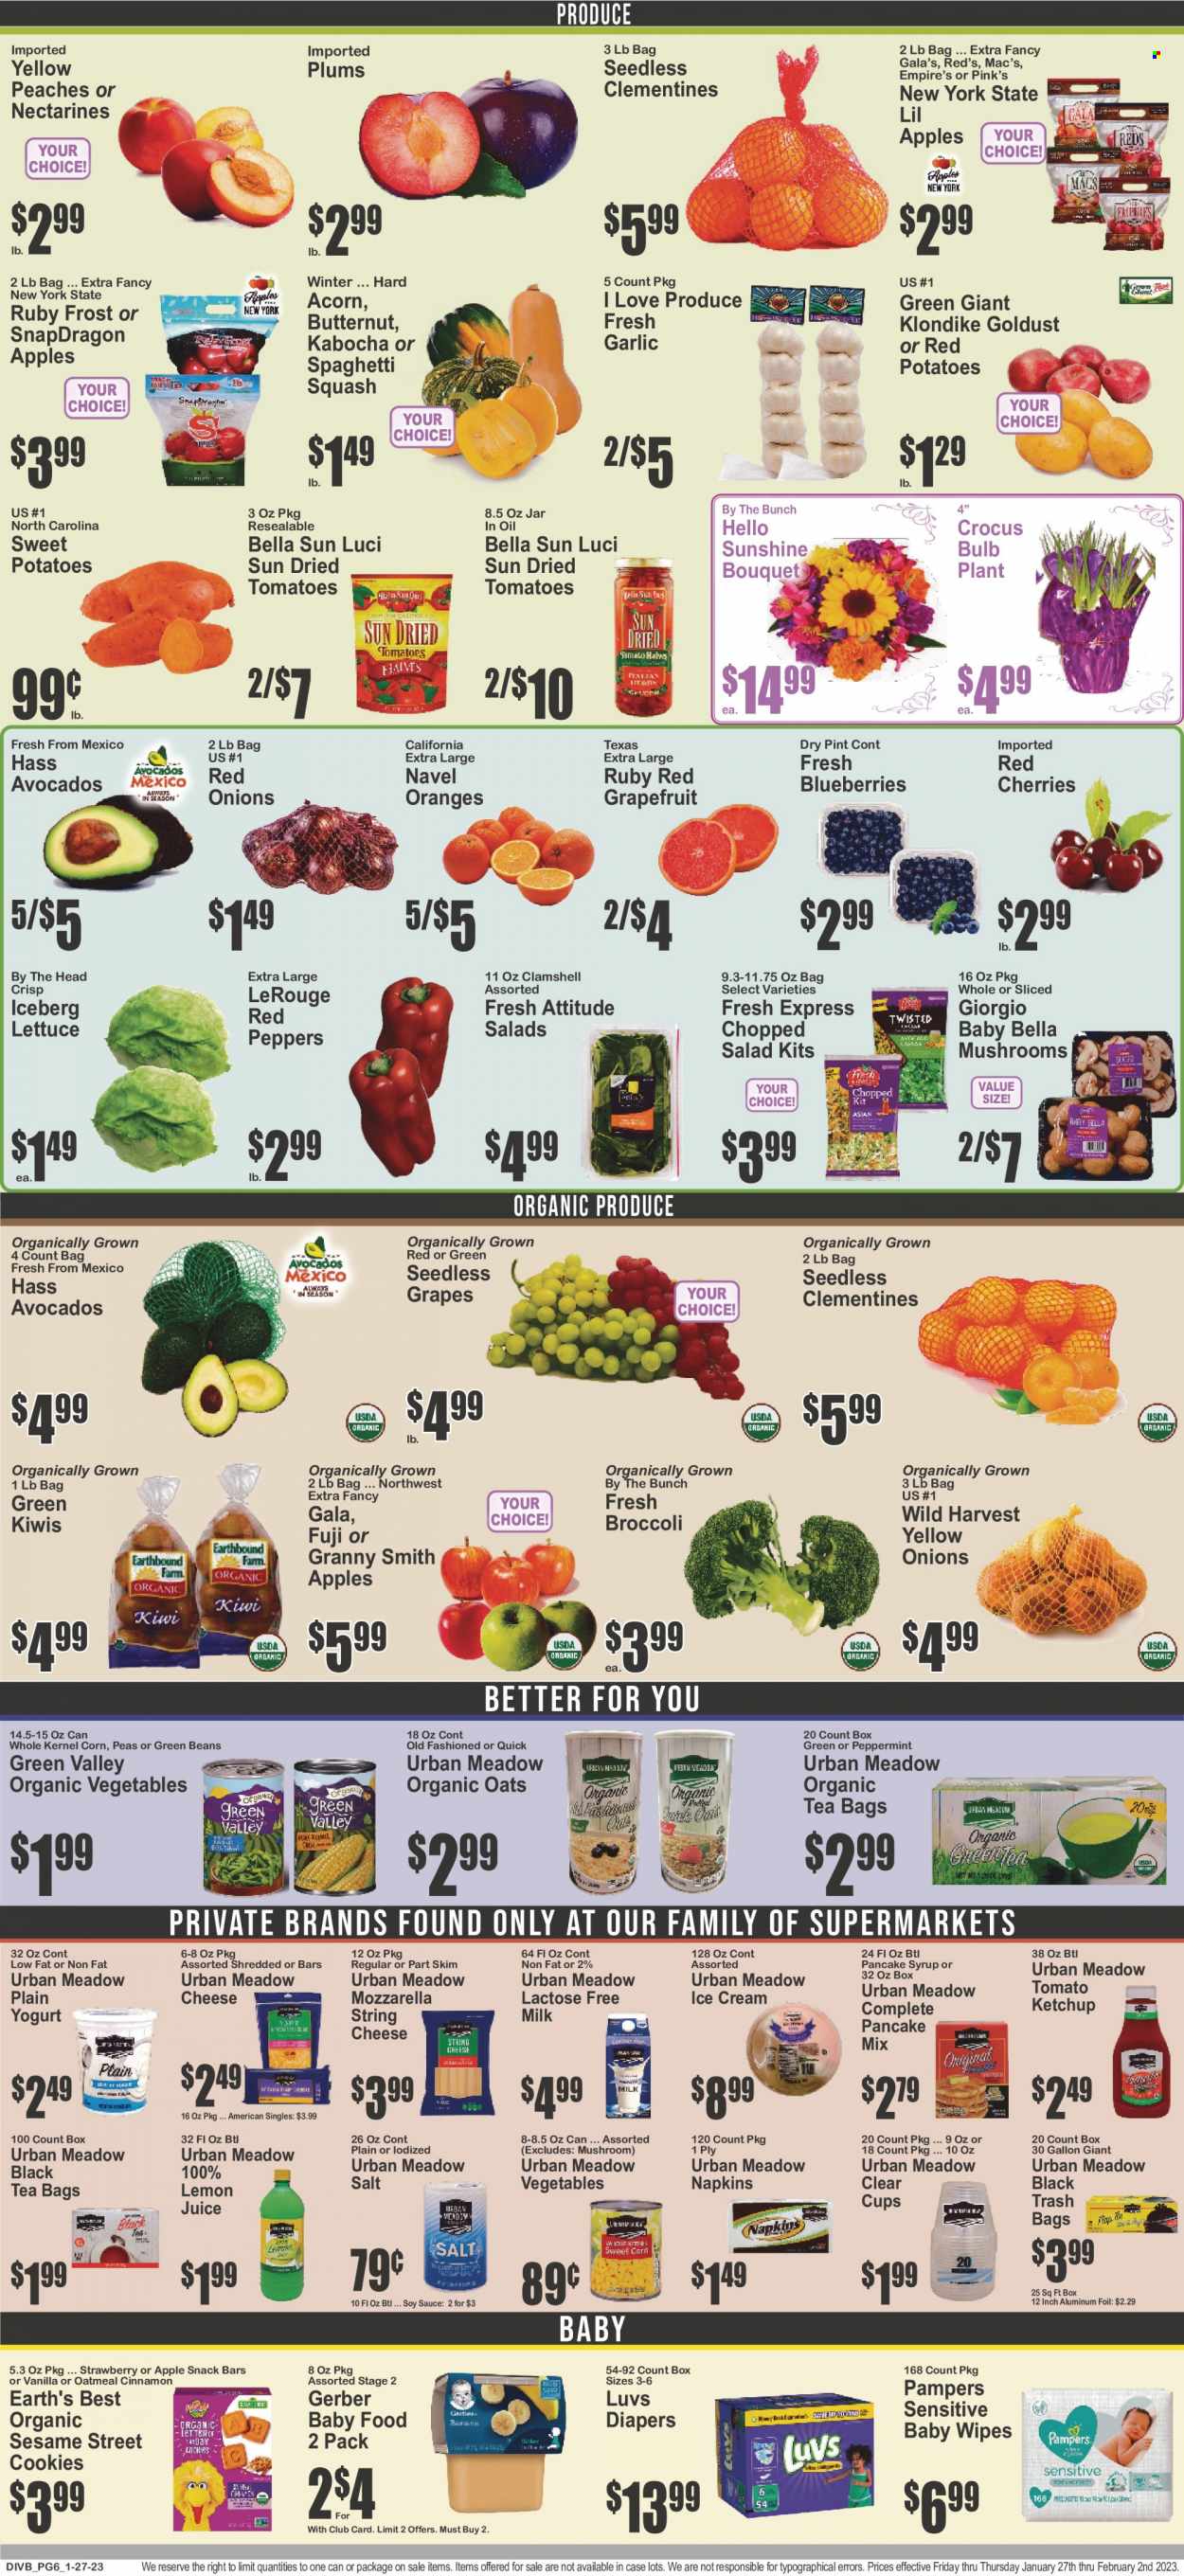 thumbnail - Food Universe Flyer - 01/27/2023 - 02/02/2023 - Sales products - mushrooms, beans, broccoli, corn, garlic, green beans, red onions, potatoes, pumpkin, peas, onion, lettuce, salad, peppers, Wild Harvest, red potatoes, chopped salad, red peppers, avocado, blueberries, Gala, grapefruits, grapes, kiwi, seedless grapes, plums, oranges, Granny Smith, sauce, mozzarella, string cheese, cheese, yoghurt, milk, lactose free milk, ice cream, cookies, snack, snack bar, Sesame Street, Gerber, oatmeal, oats, dried tomatoes, Bella Sun Luci, cinnamon, soy sauce, ketchup, pancake syrup, syrup, lemon juice, tea bags, Mac’s, wipes, Pampers, baby wipes, napkins, nappies, trash bags, cup, aluminium foil, bulb, bouquet, butternut squash, clementines, nectarines, peaches, navel oranges. Page 6.